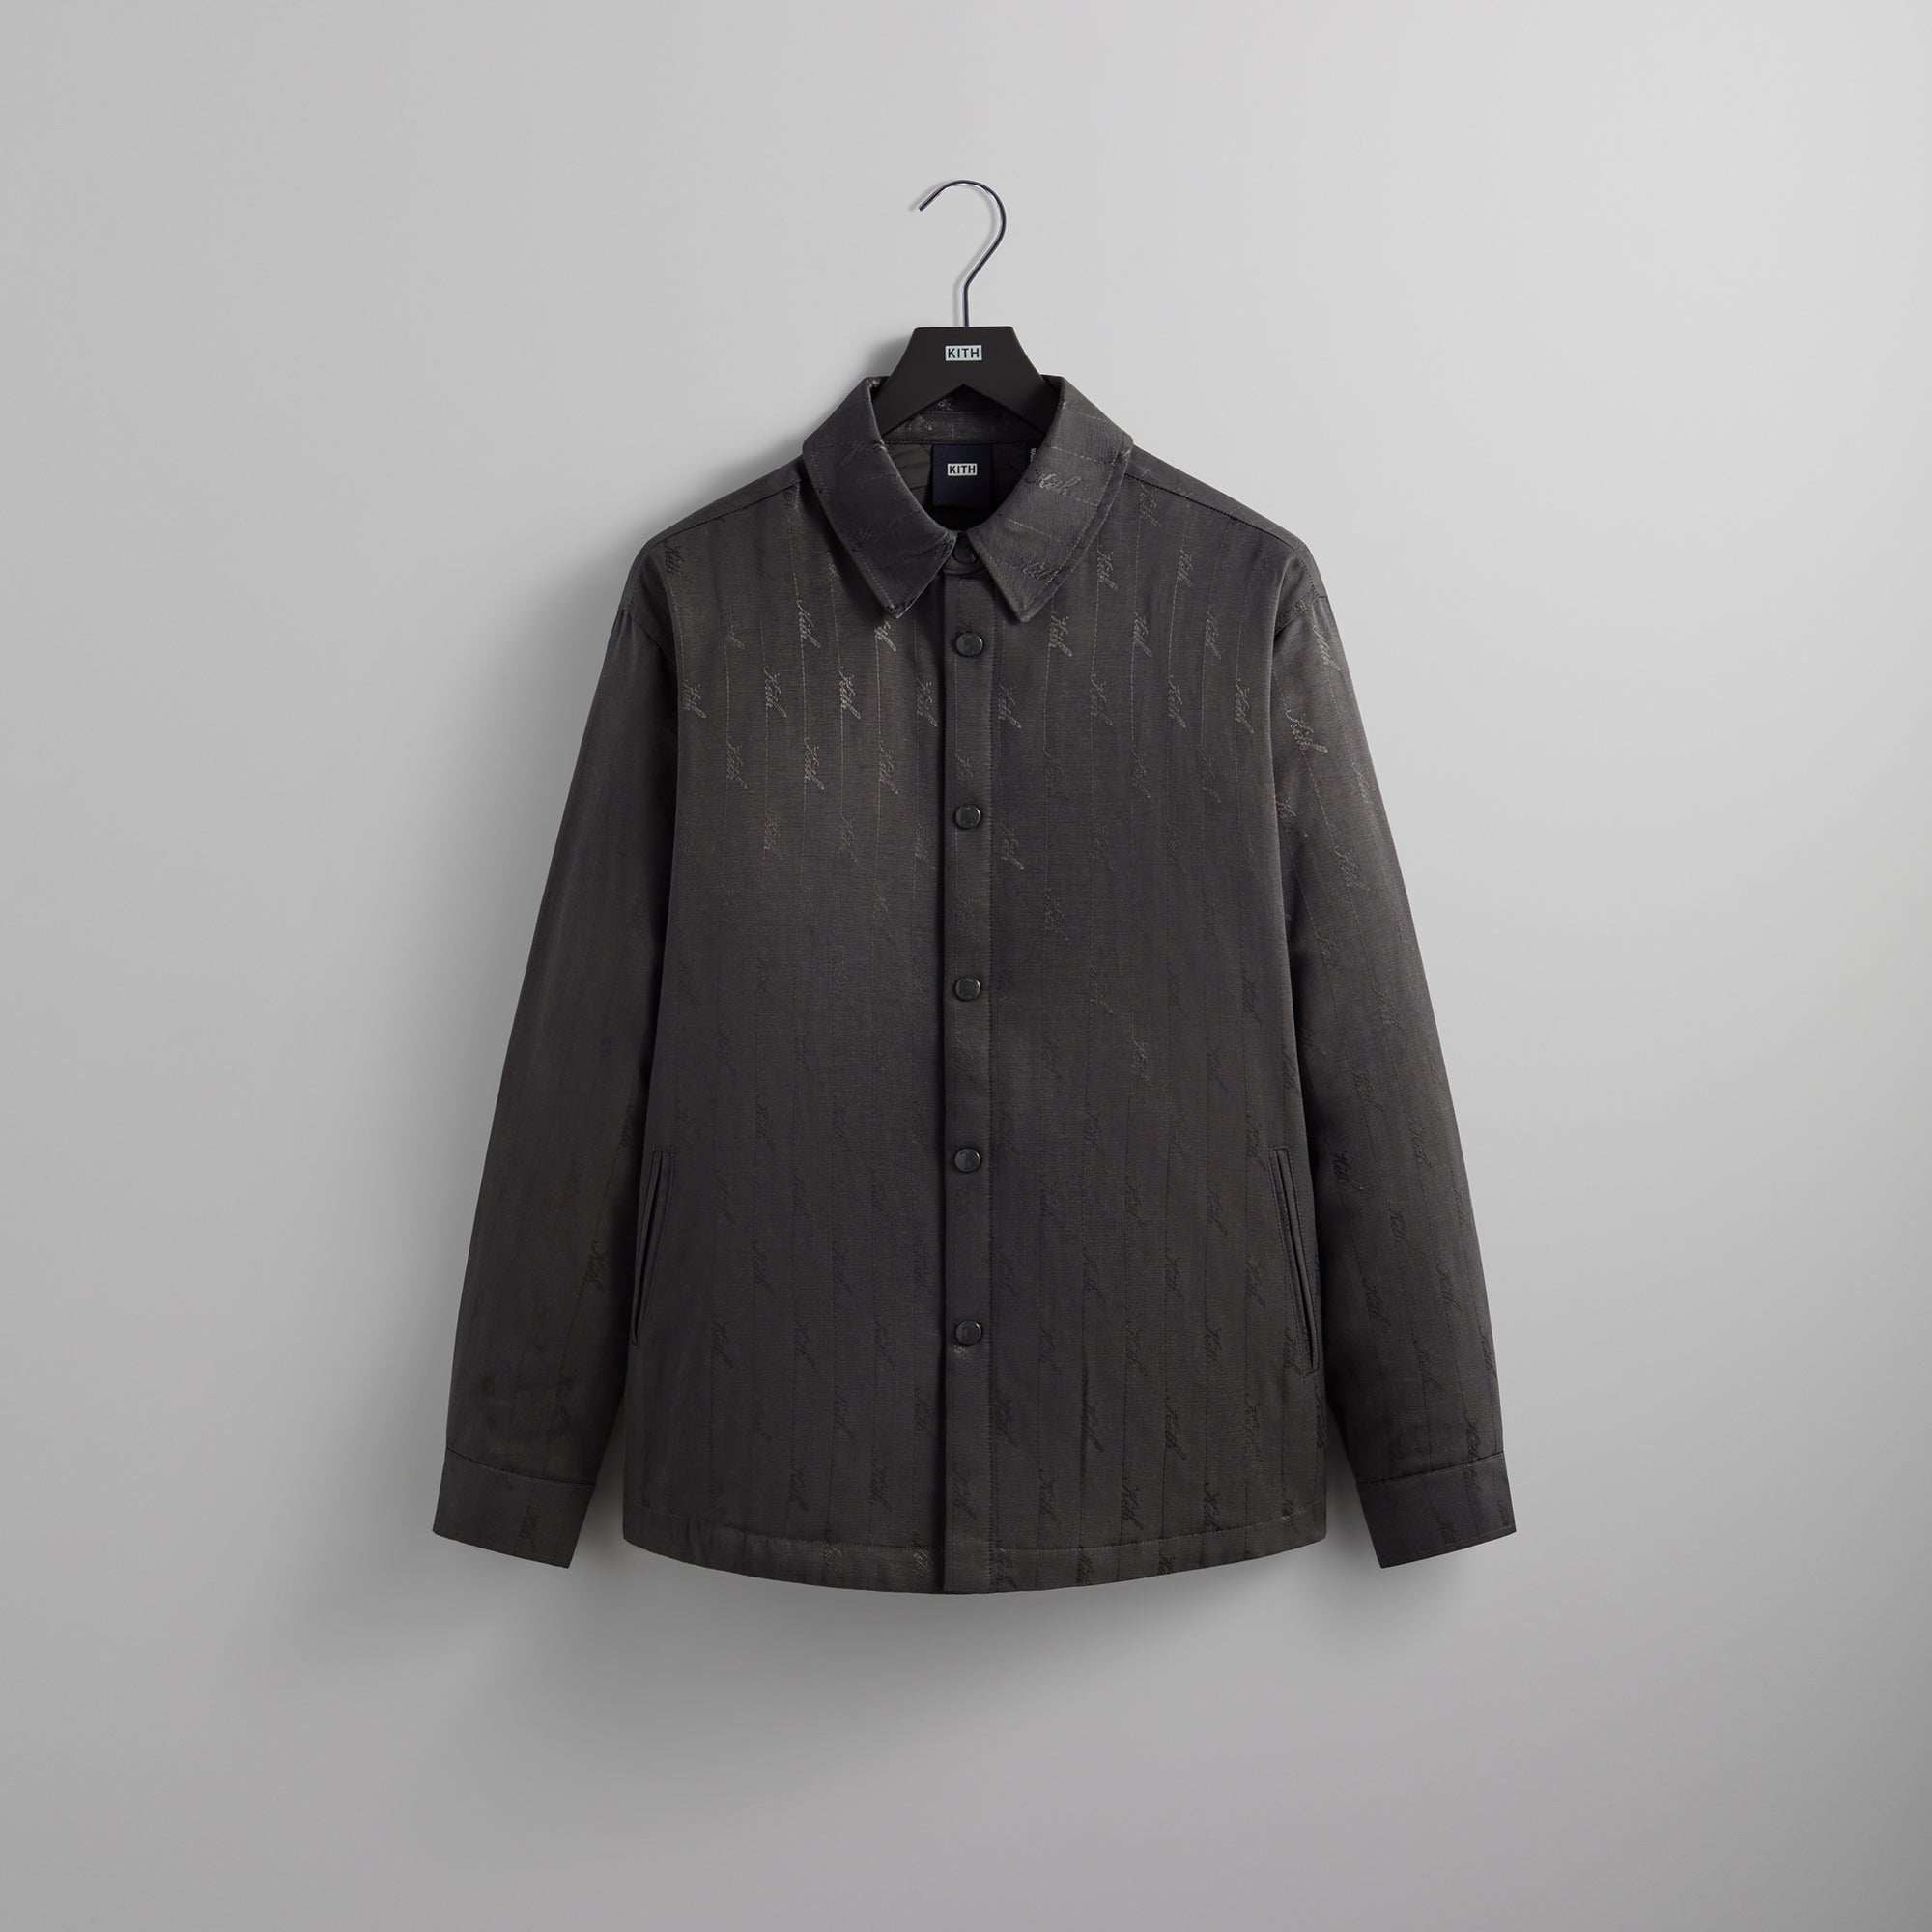 Kith Jacquard Faille Sutton Quilted Shirt Jacket - Somber XS